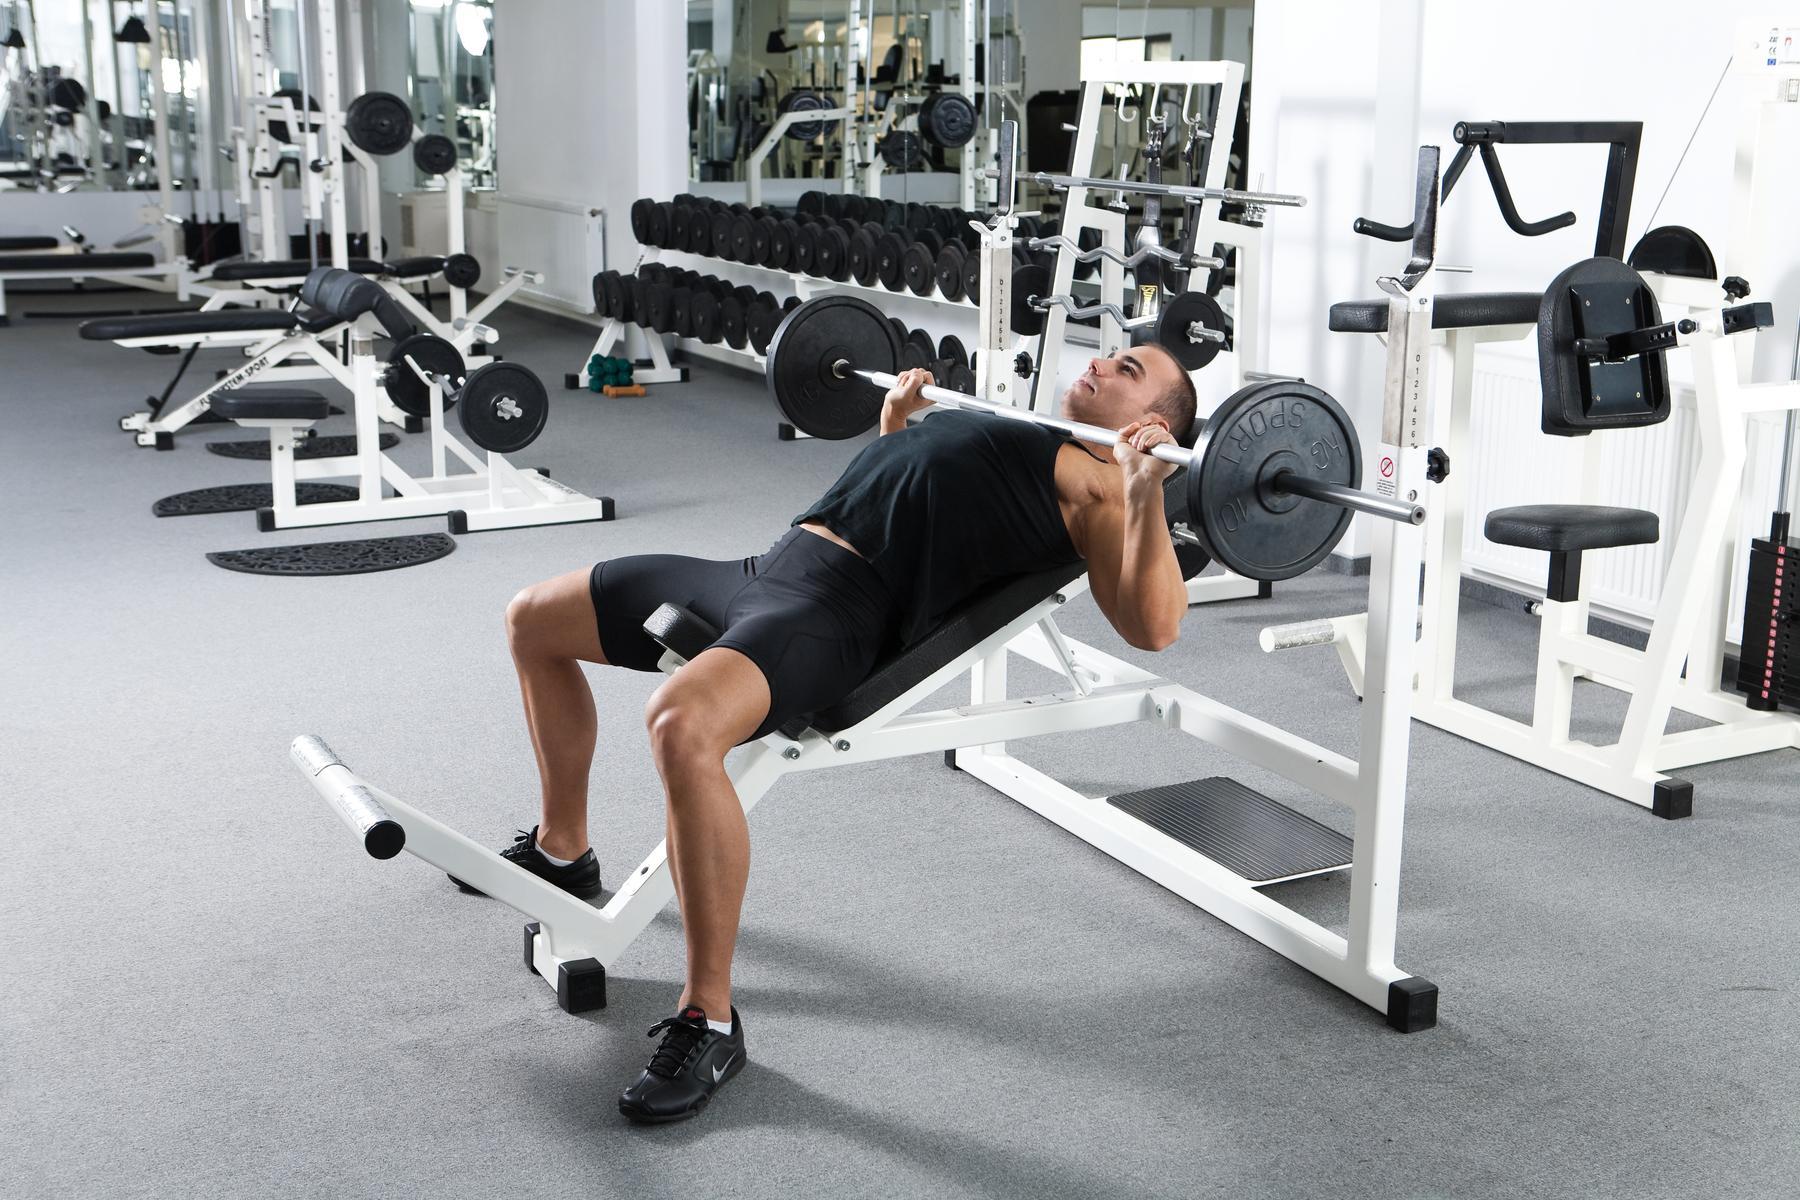 Build Upper Body Strength with Incline Dumbbell Bench Press